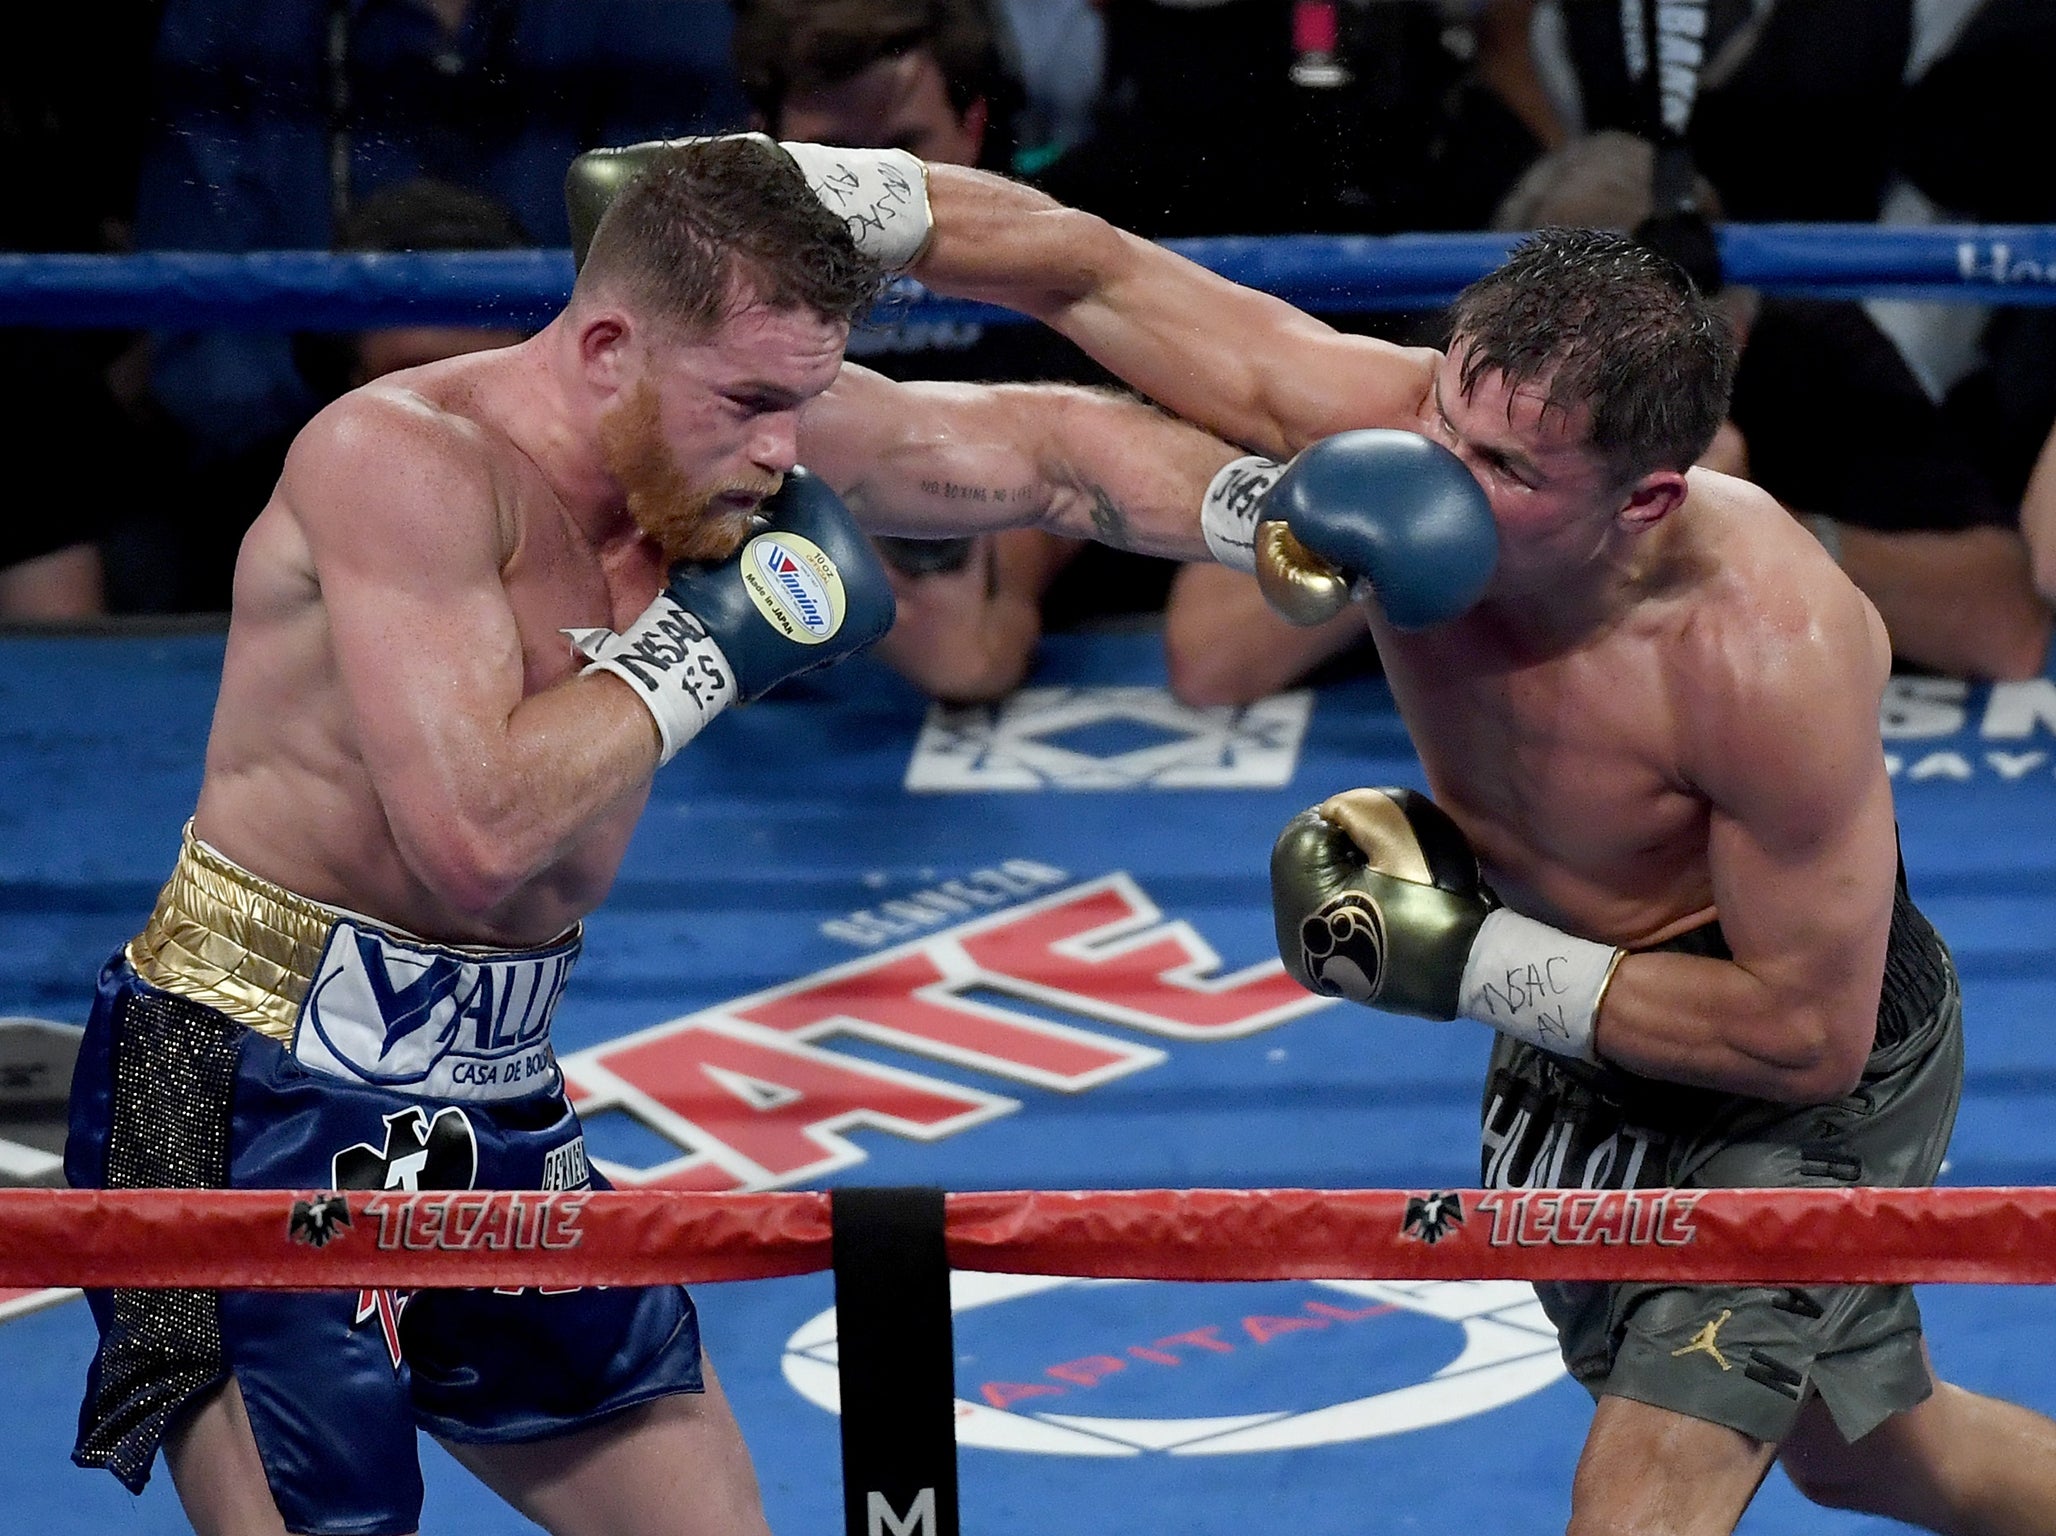 Golovkin and Canelo battled to a draw